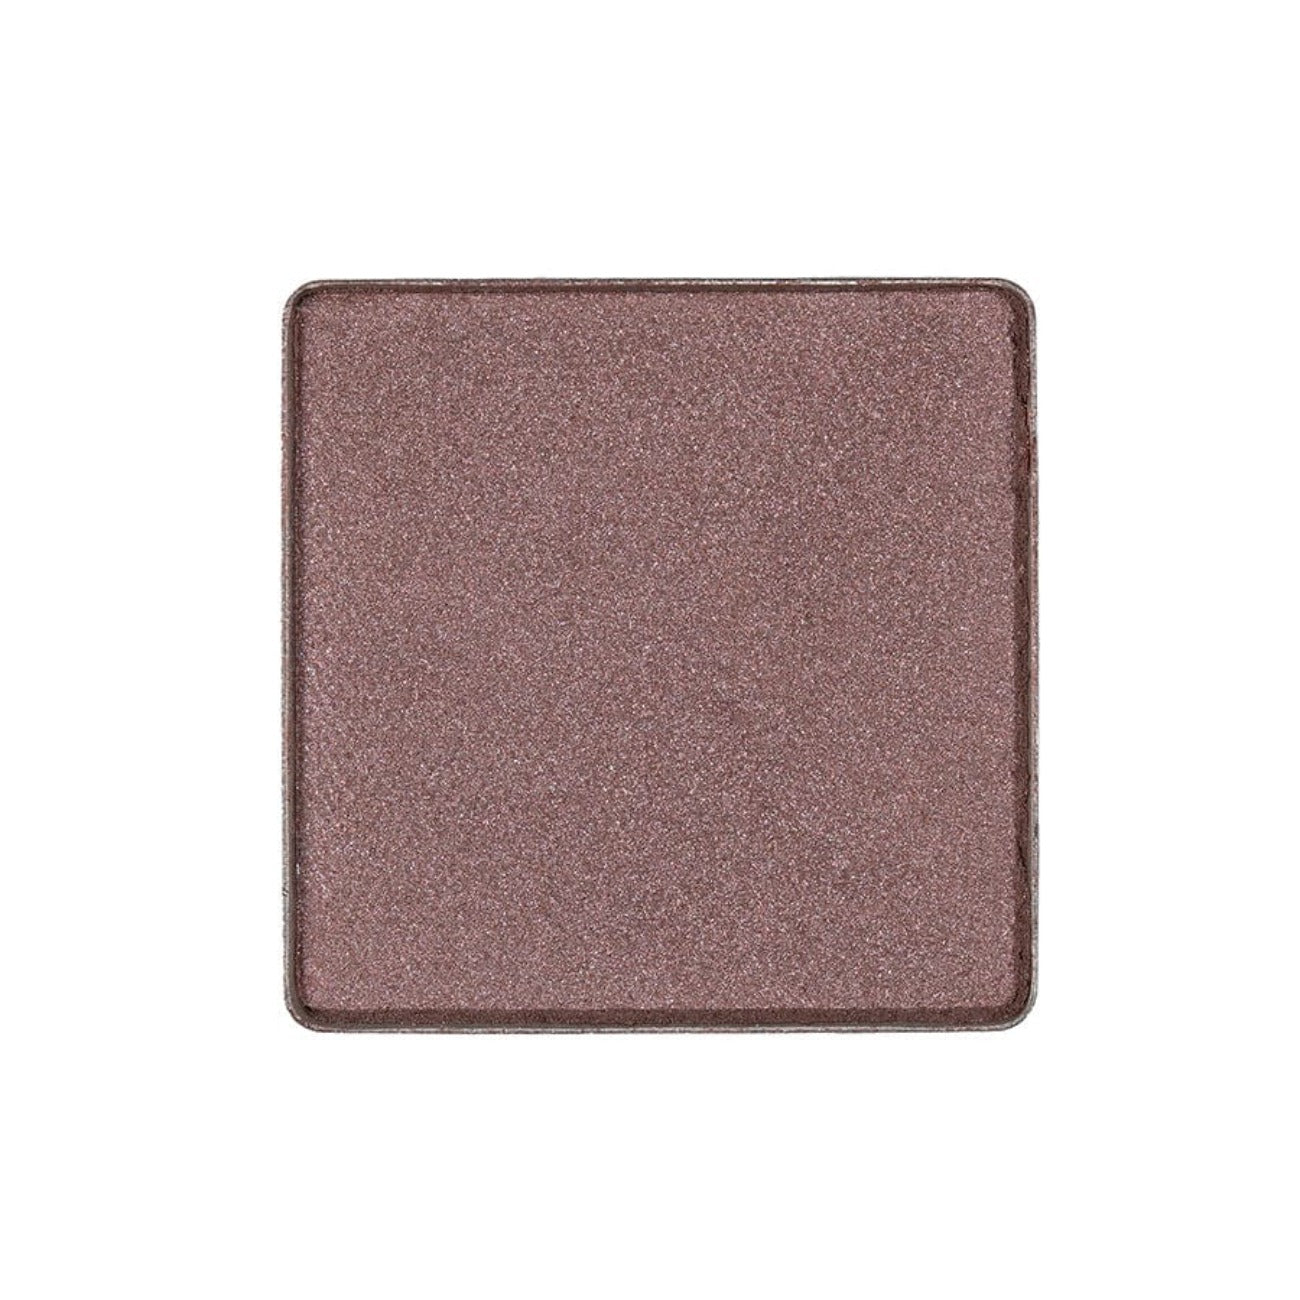 Lilac Light Eyeshadow for Refillable Make Up Palette 1.5g